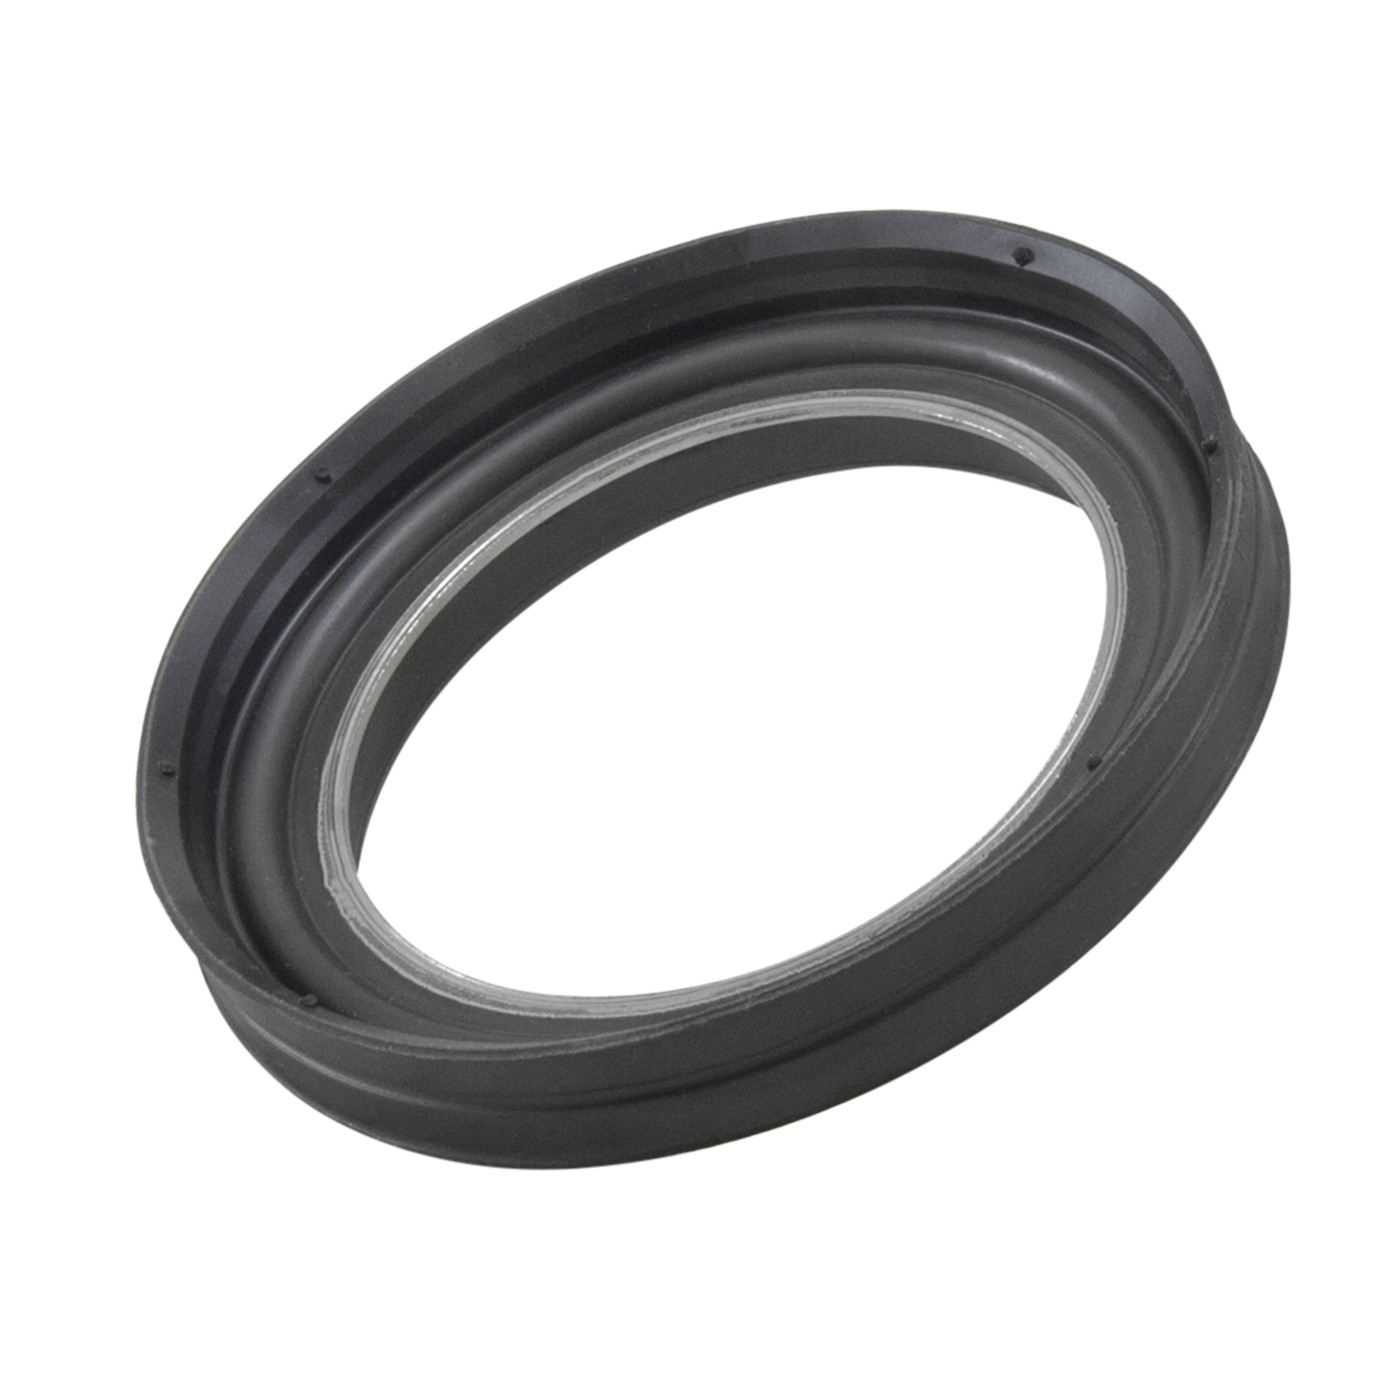 Replacement axle tube seal for Dana 60, 99 & up Ford, V-LIP design. 